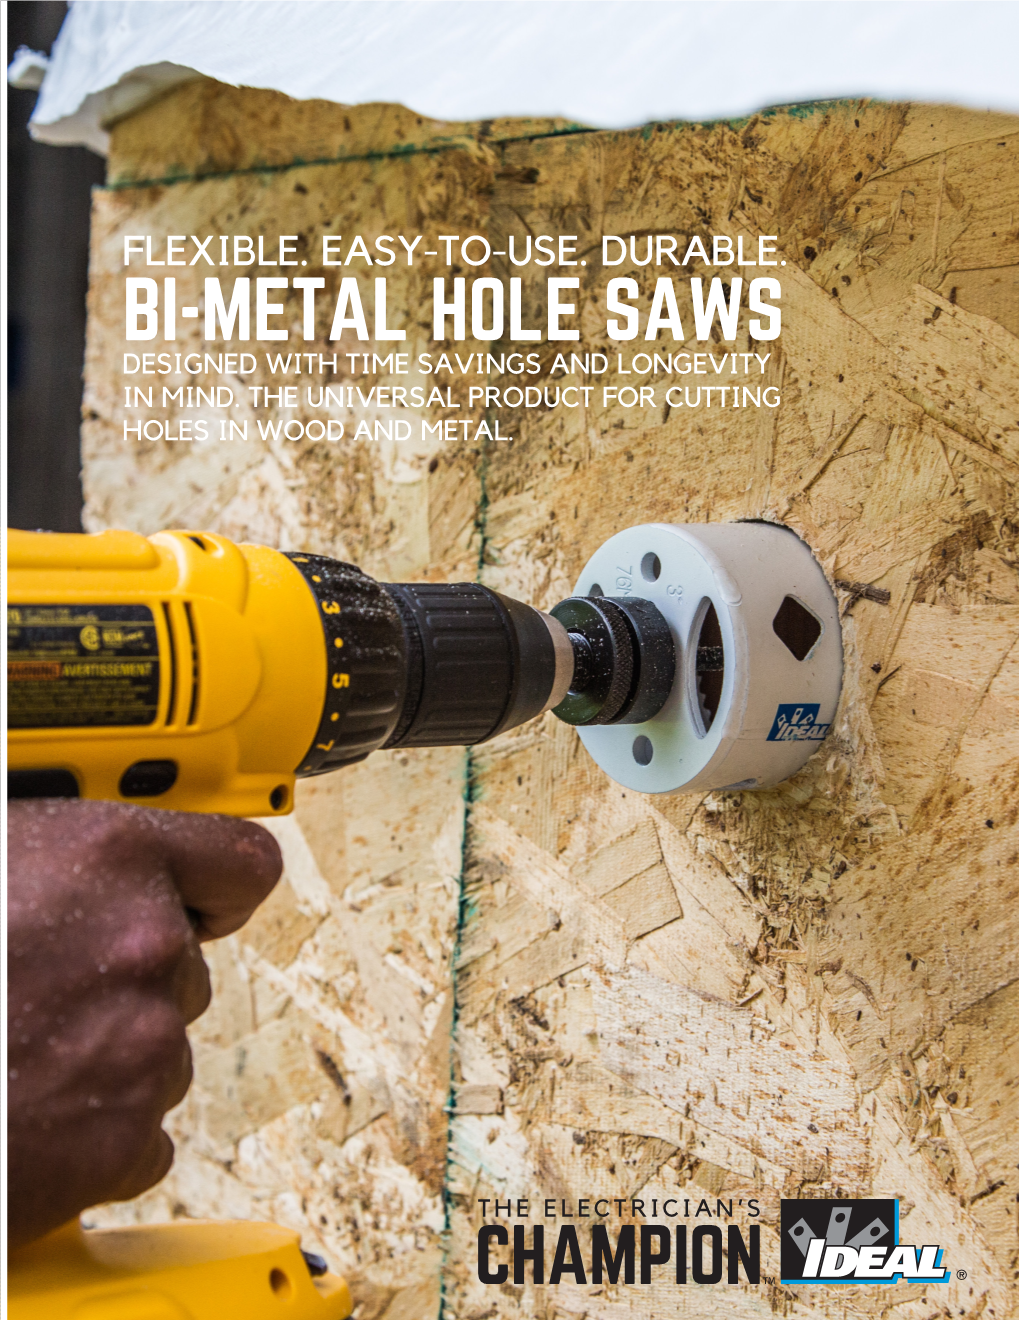 Bi-Metal Hole Saws Designed with Time Savings and Longevity in Mind